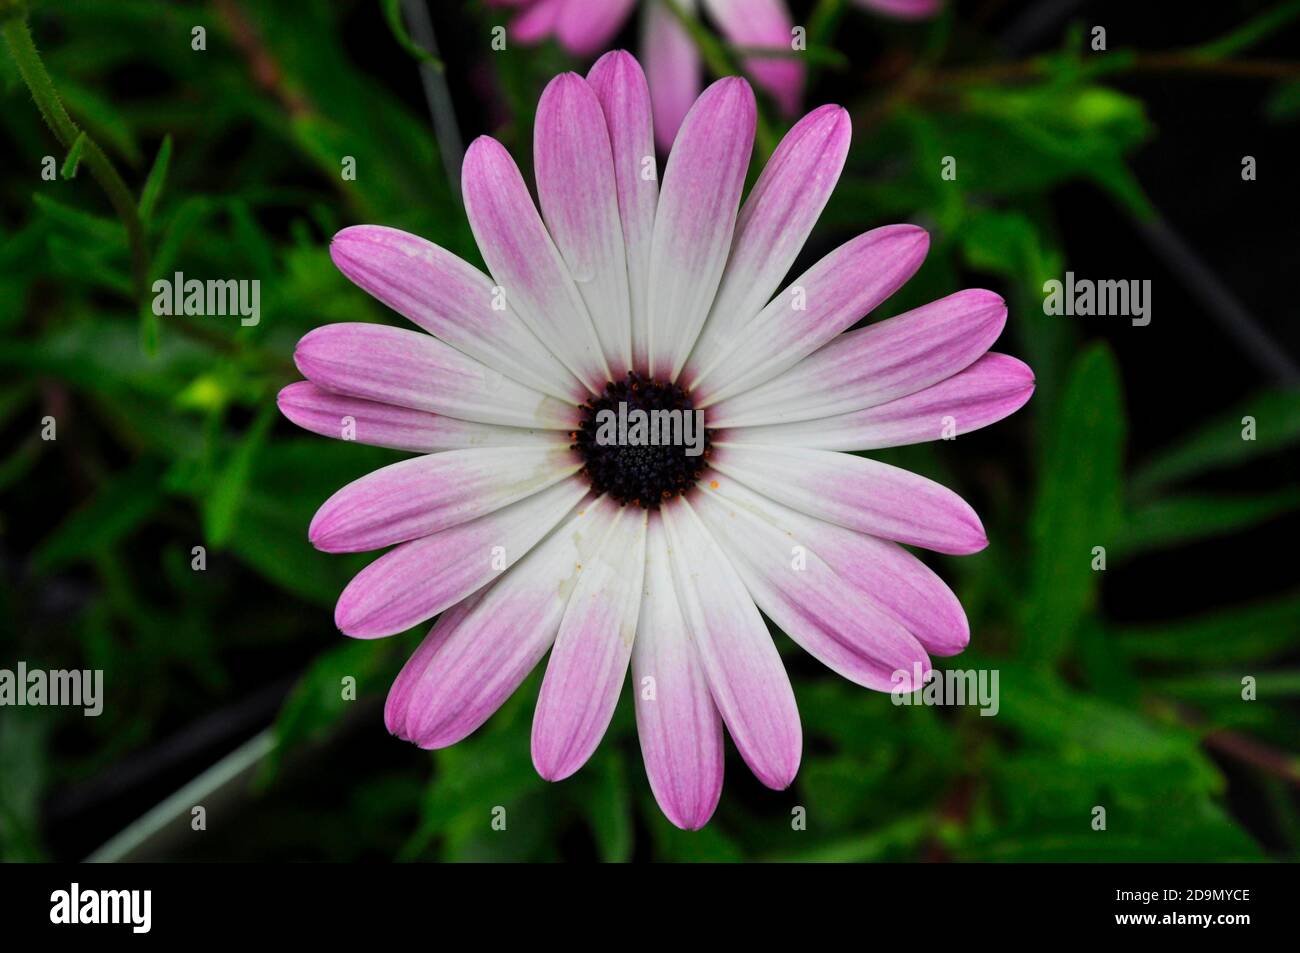 Flower, Close up of a member of the compositae family.White and magenta petals with a black coloured centre.In a Wiltshire garden.UK Stock Photo